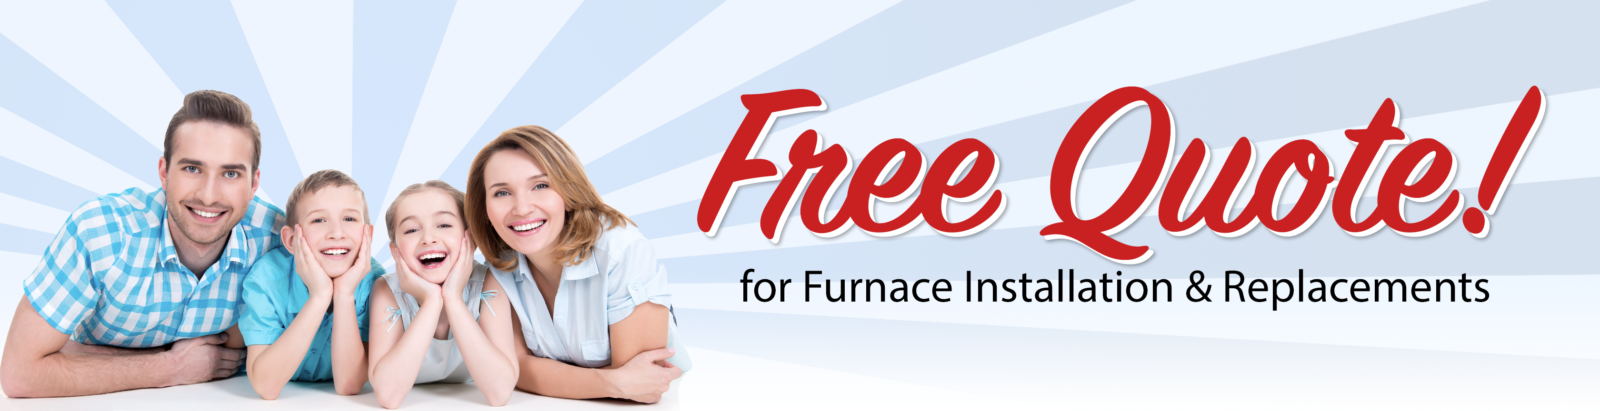 Furnace Installation Quote